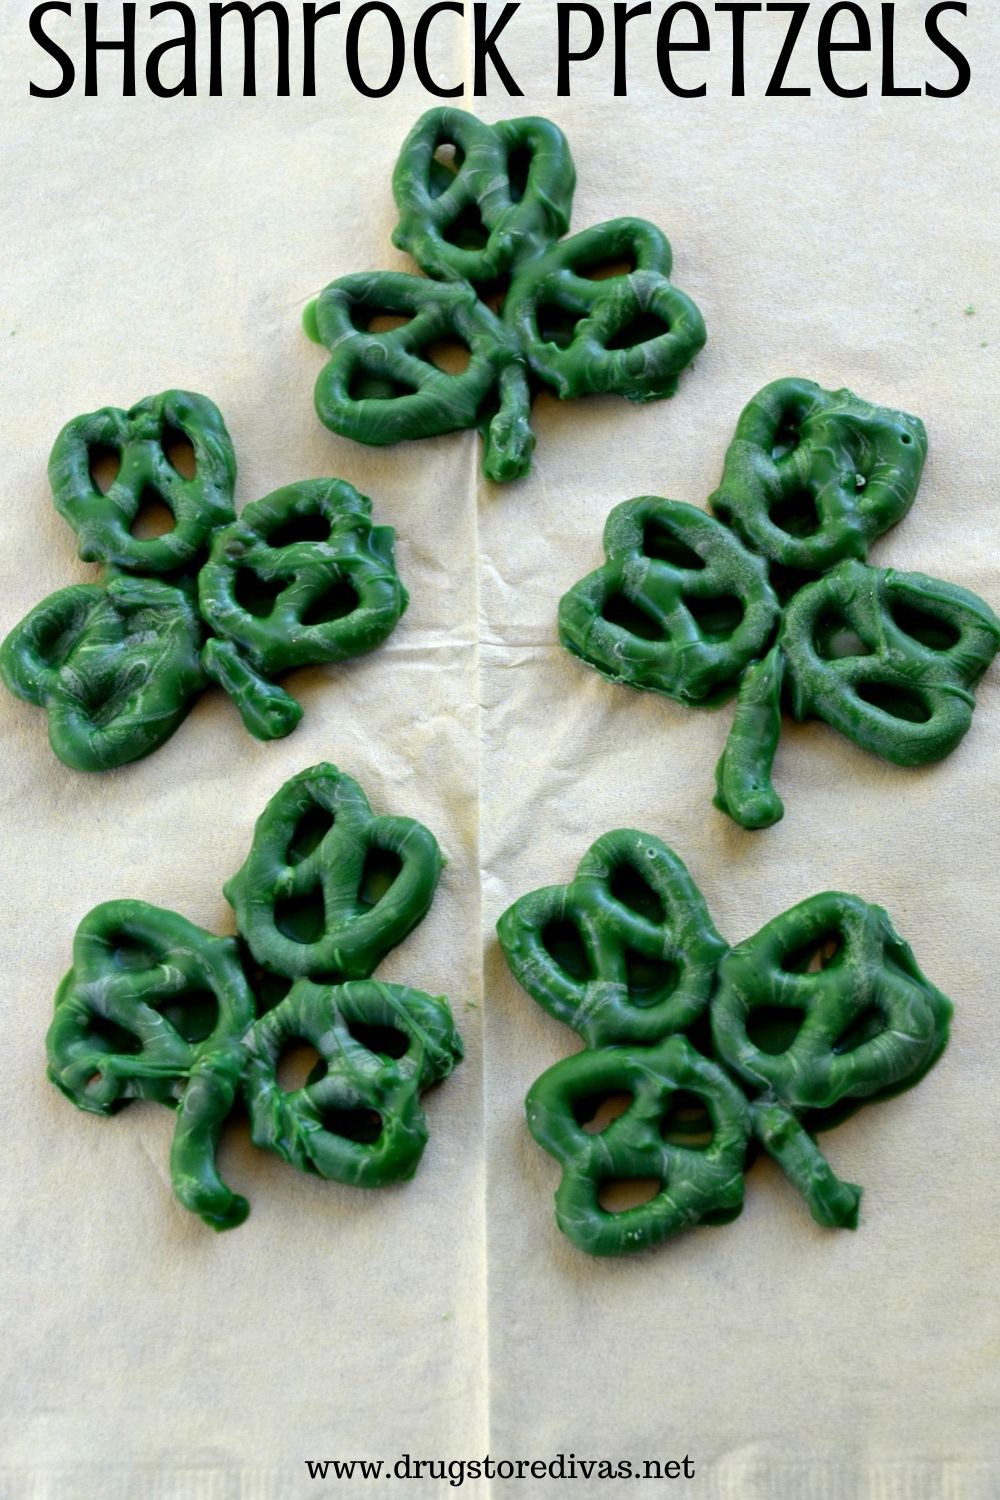 Five shamrocks made of pretzels with the words 